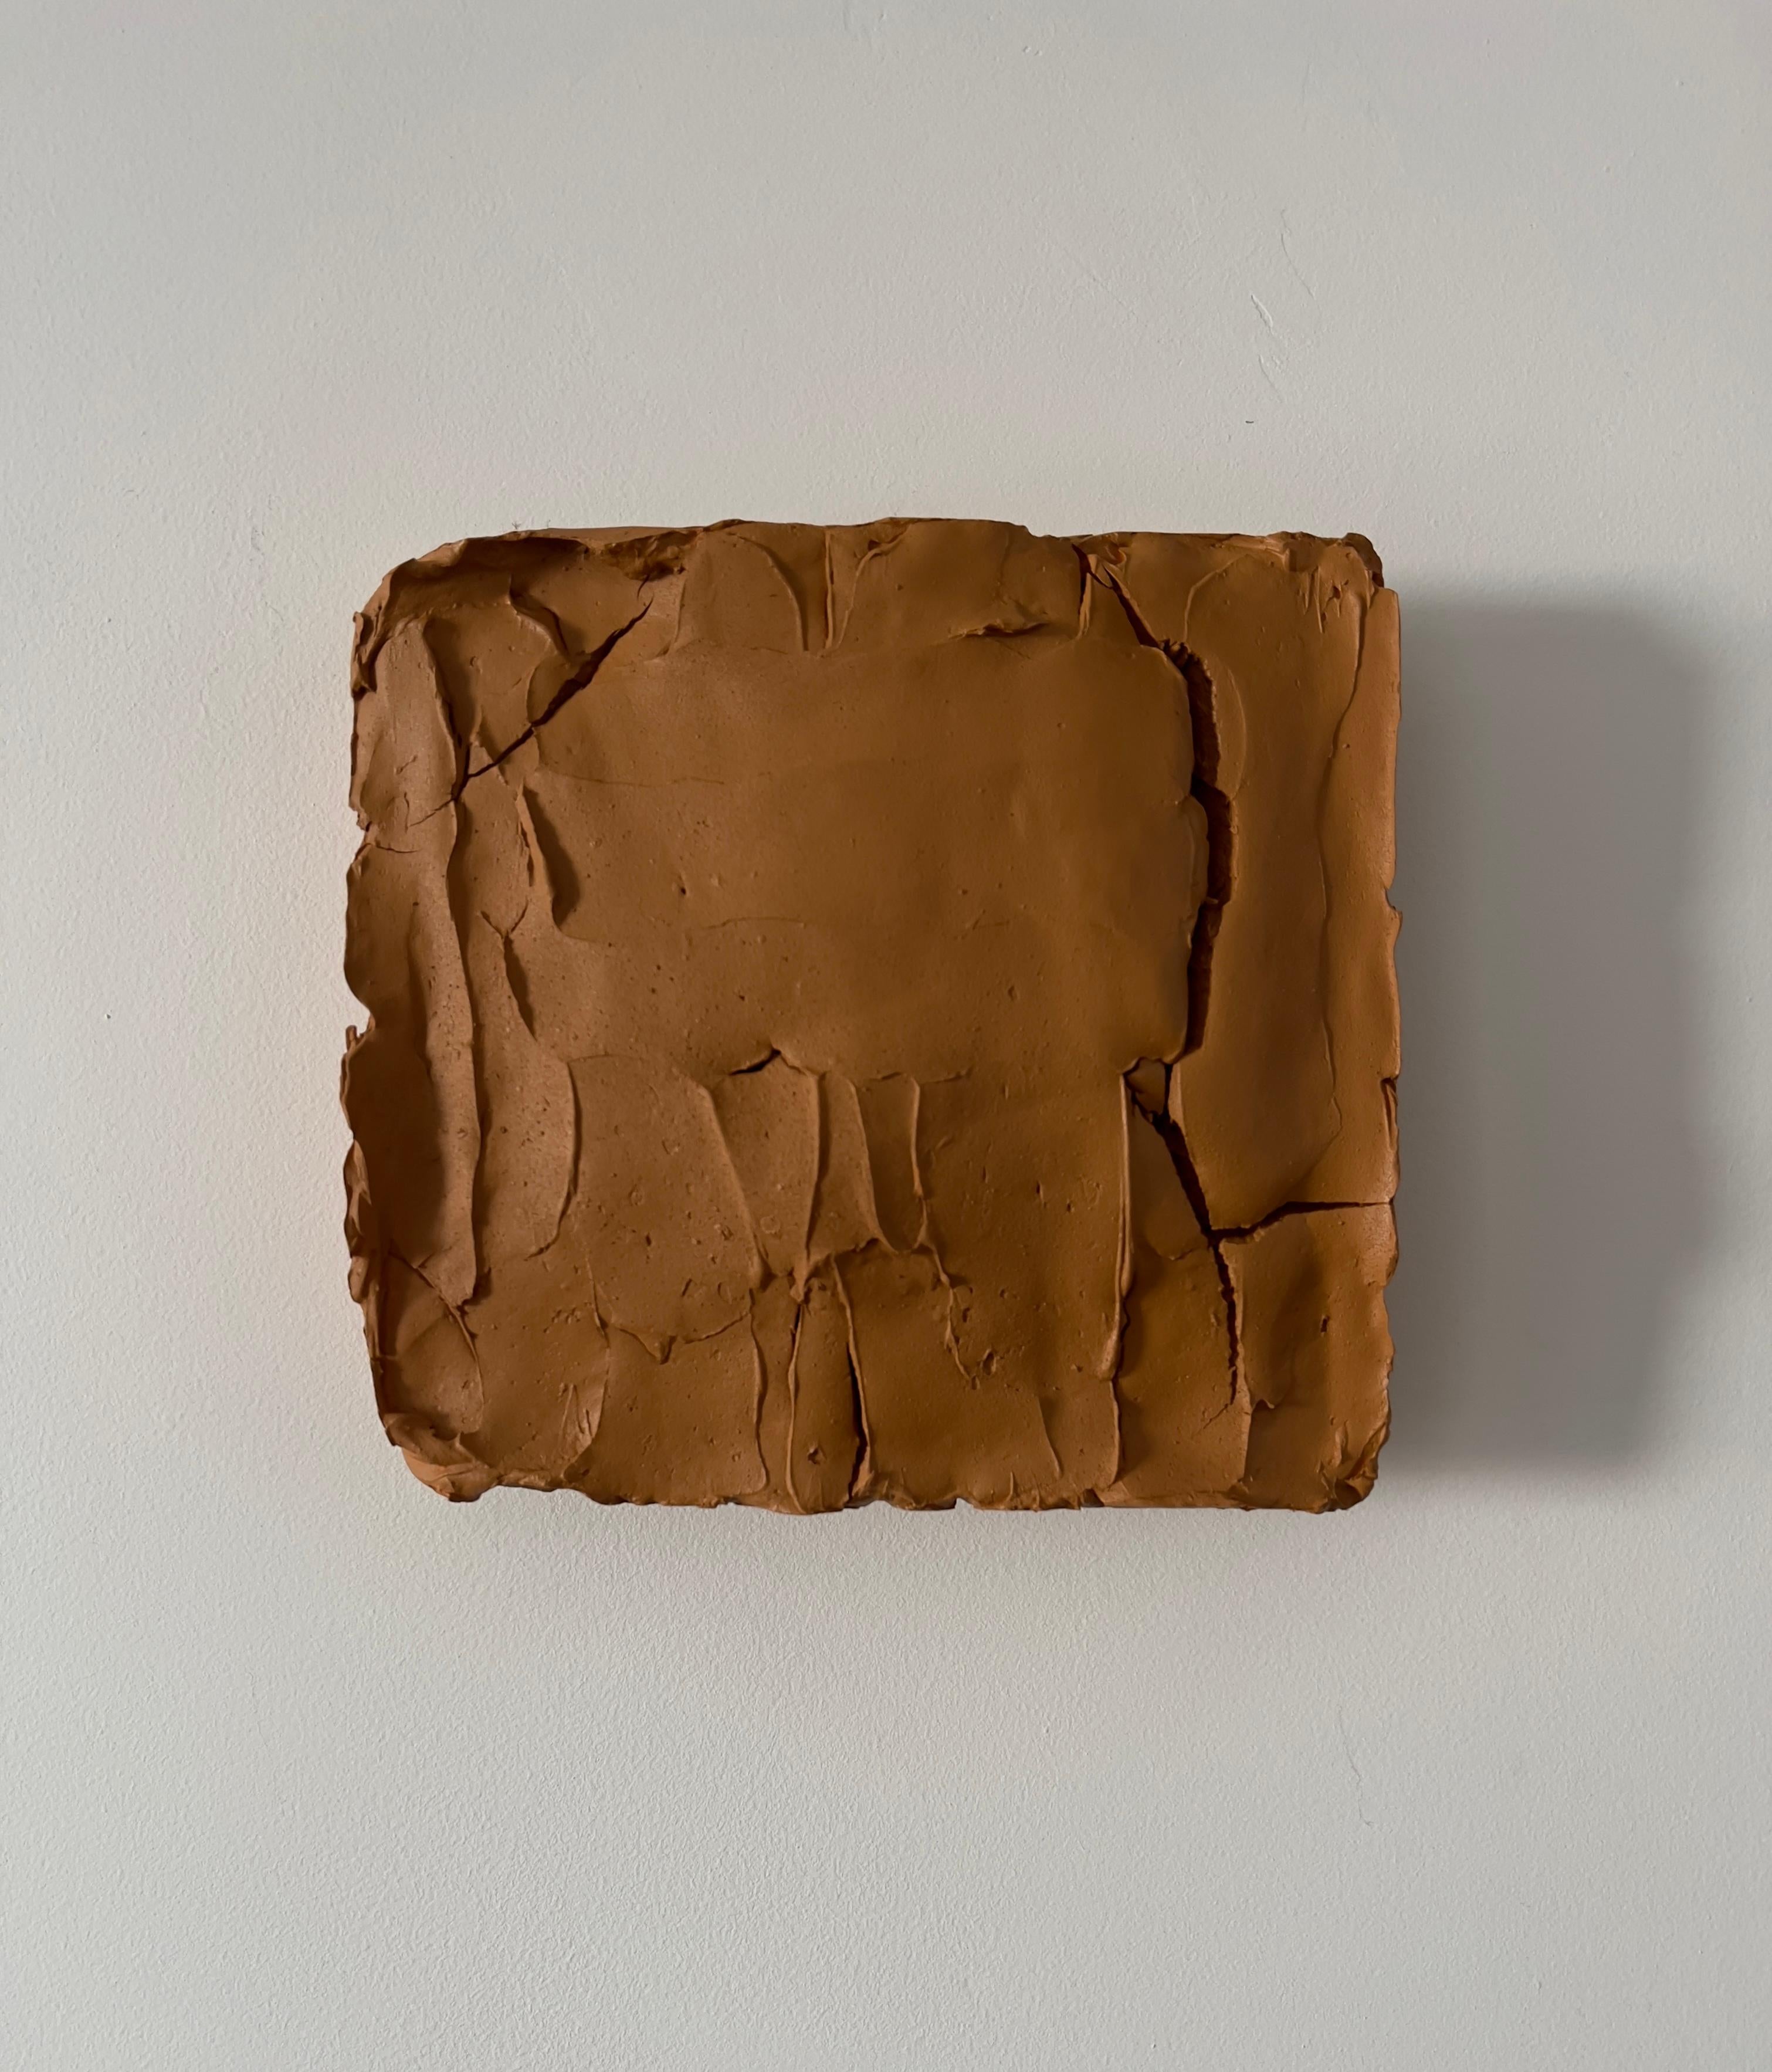 Ragisména series Brown, 2023  by Rodrigo Zampol
From Ragisména Series
Plaster and acrylic painting on canvas
Dimensions: 20 cm H x 20 cm W
Weight: 3 kg
Unique piece

Signed on the back
The piece has a certificate of authenticity

Ragisména